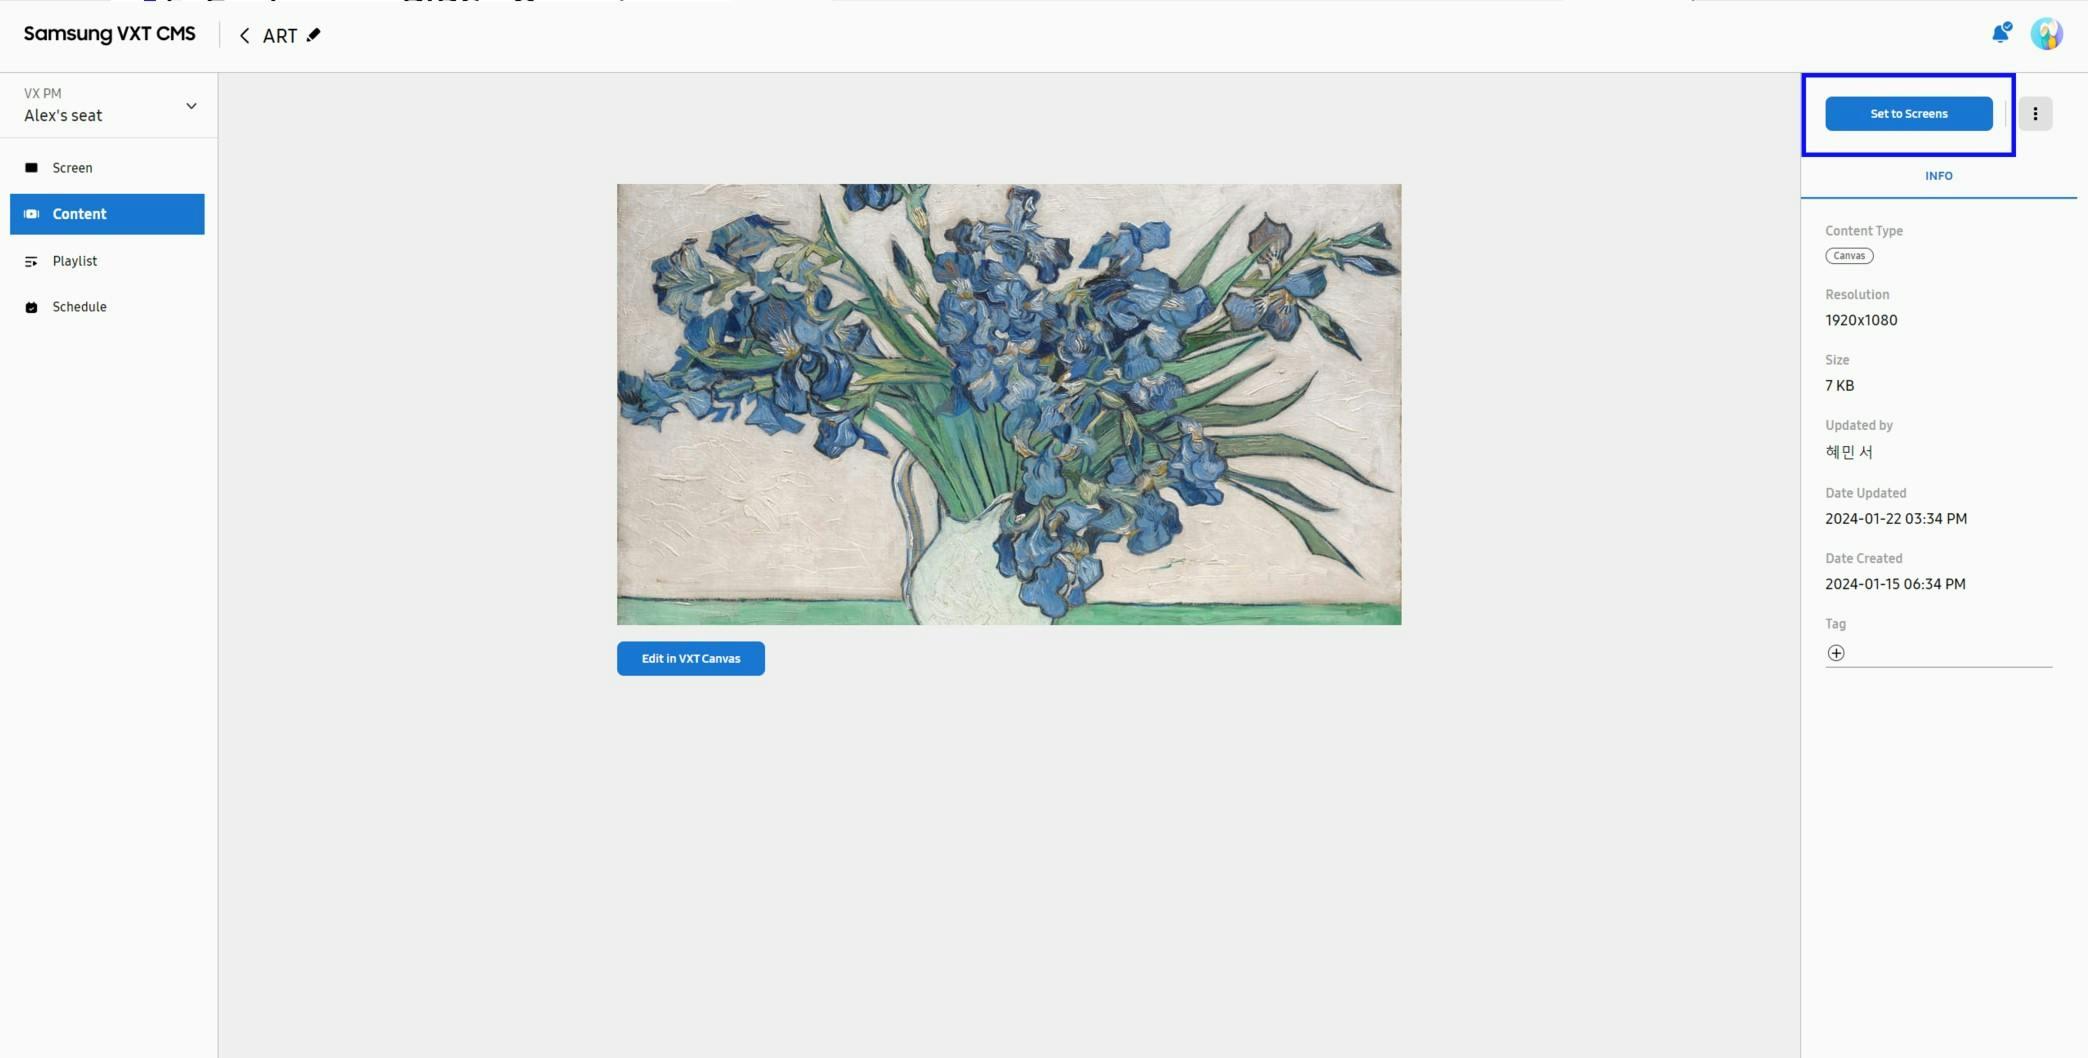 Easy creation and deployment of art with Samsung VXT Art